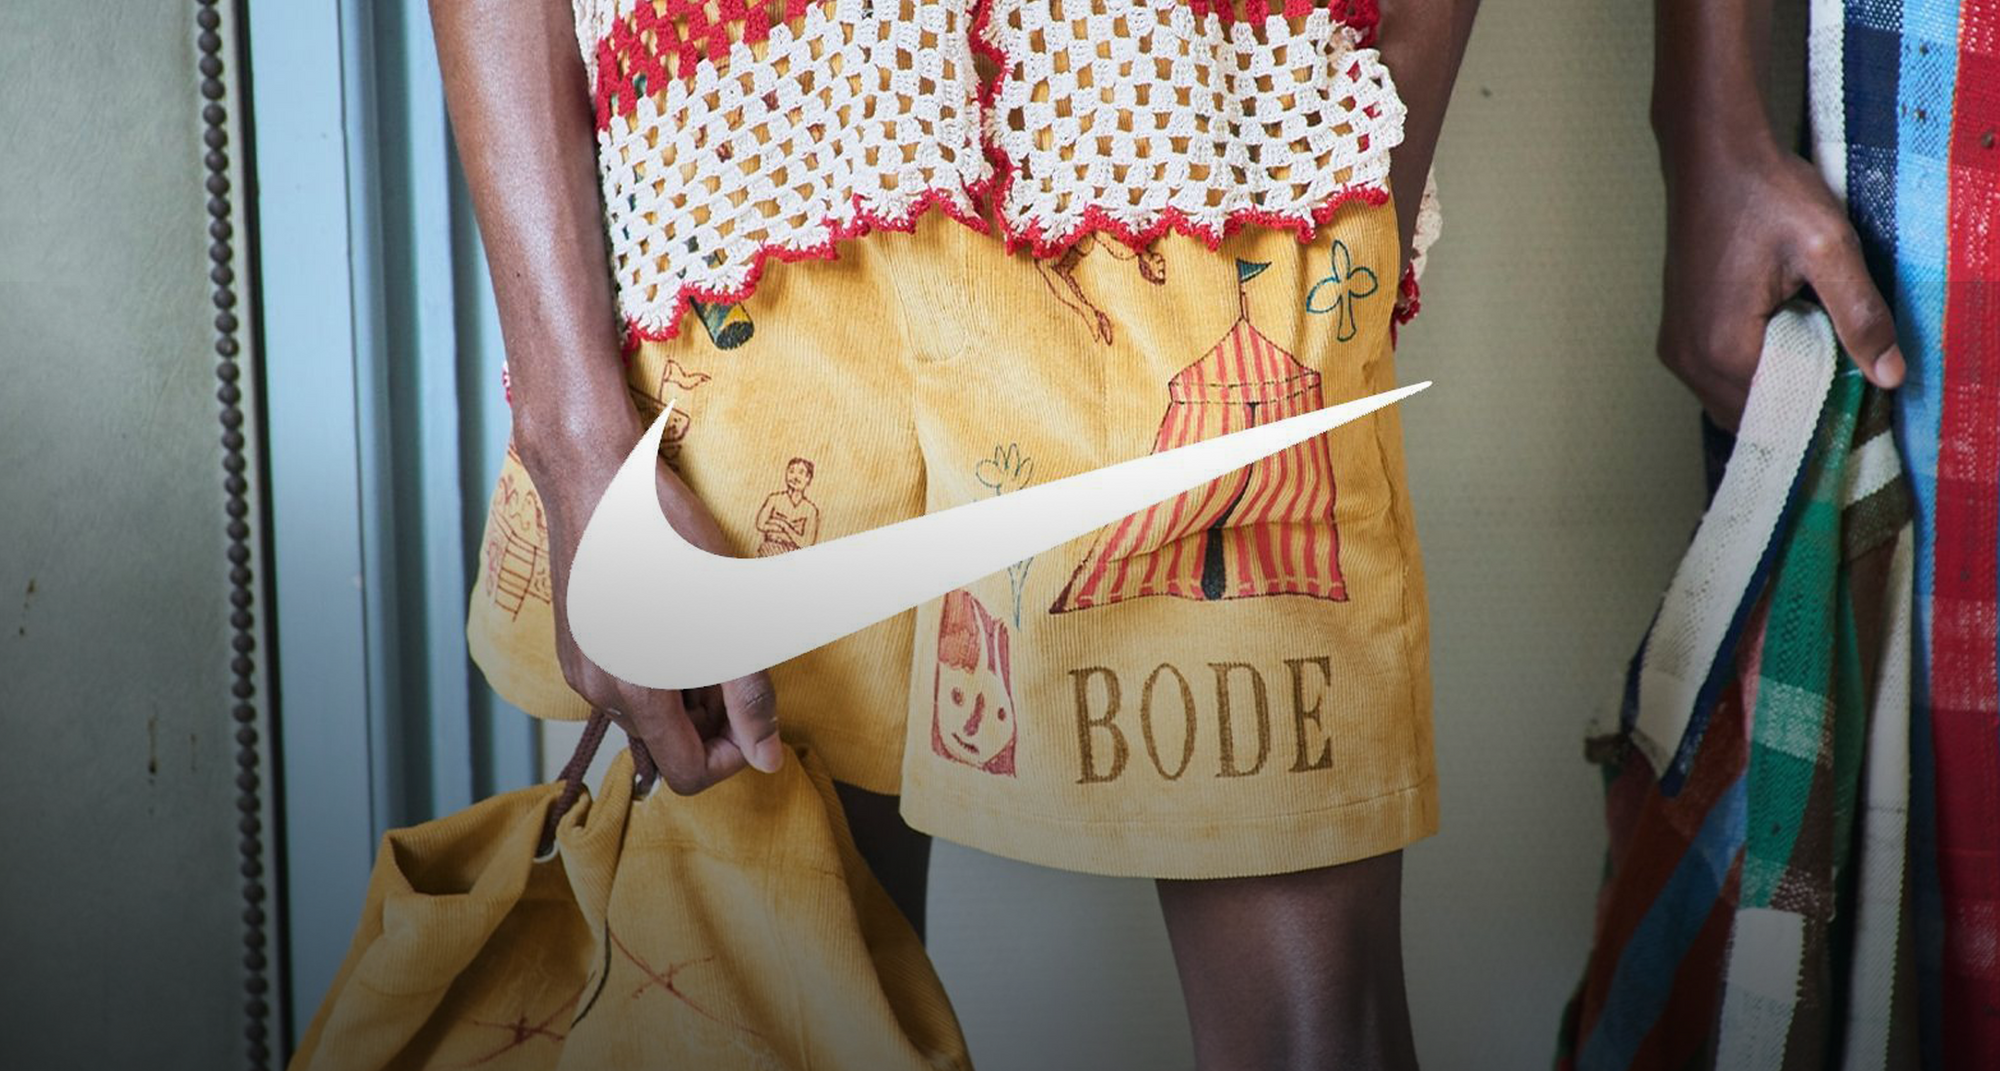 Revolutionary Meets Iconic: Introducing BODE x Nike